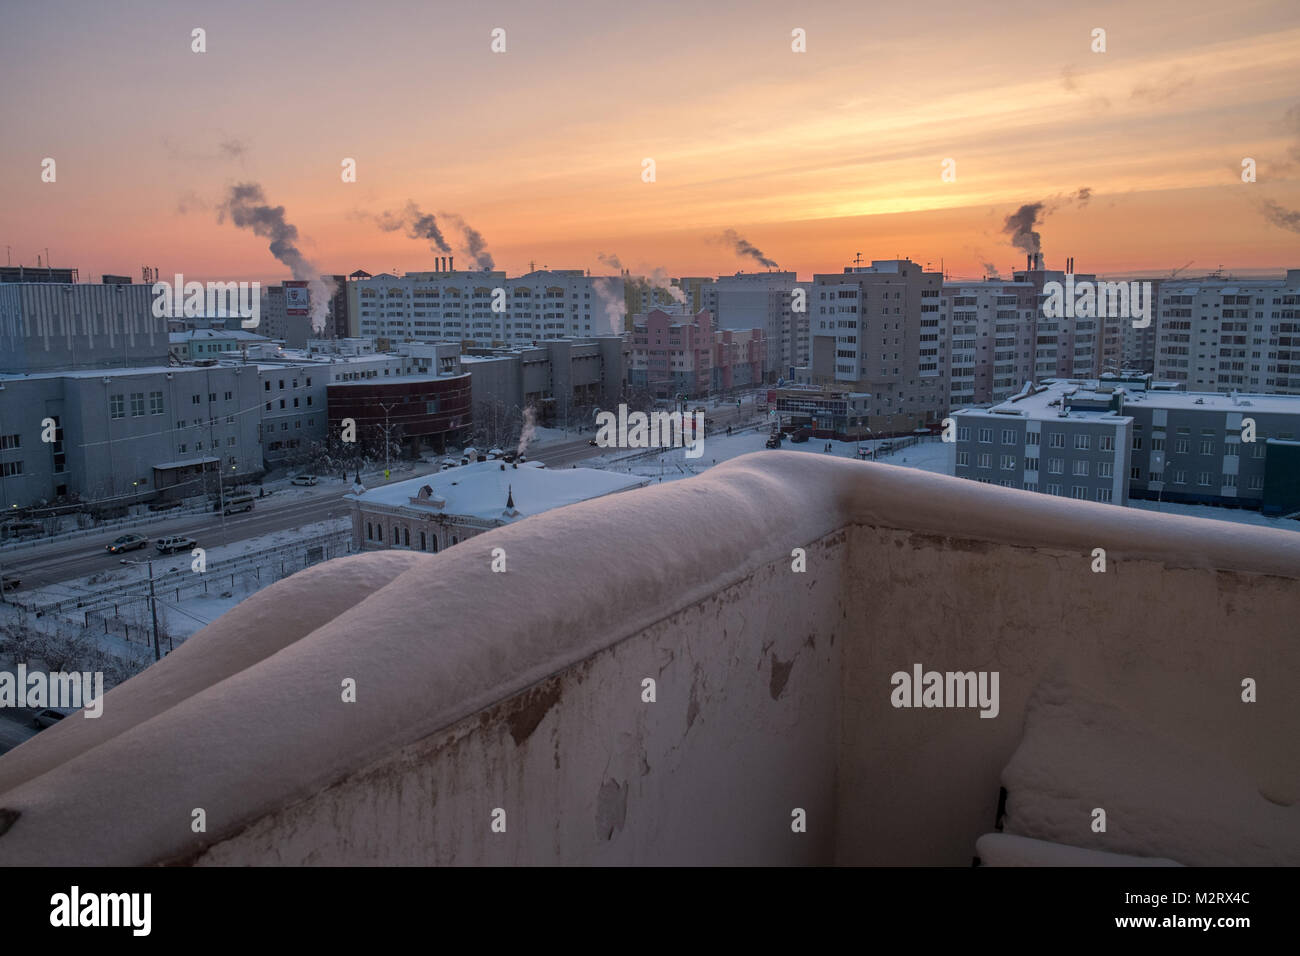 A street scene, seen from the balcony of a building in Yakutsk in Siberia  Yakutsk is a major port on the Lena River. Stock Photo